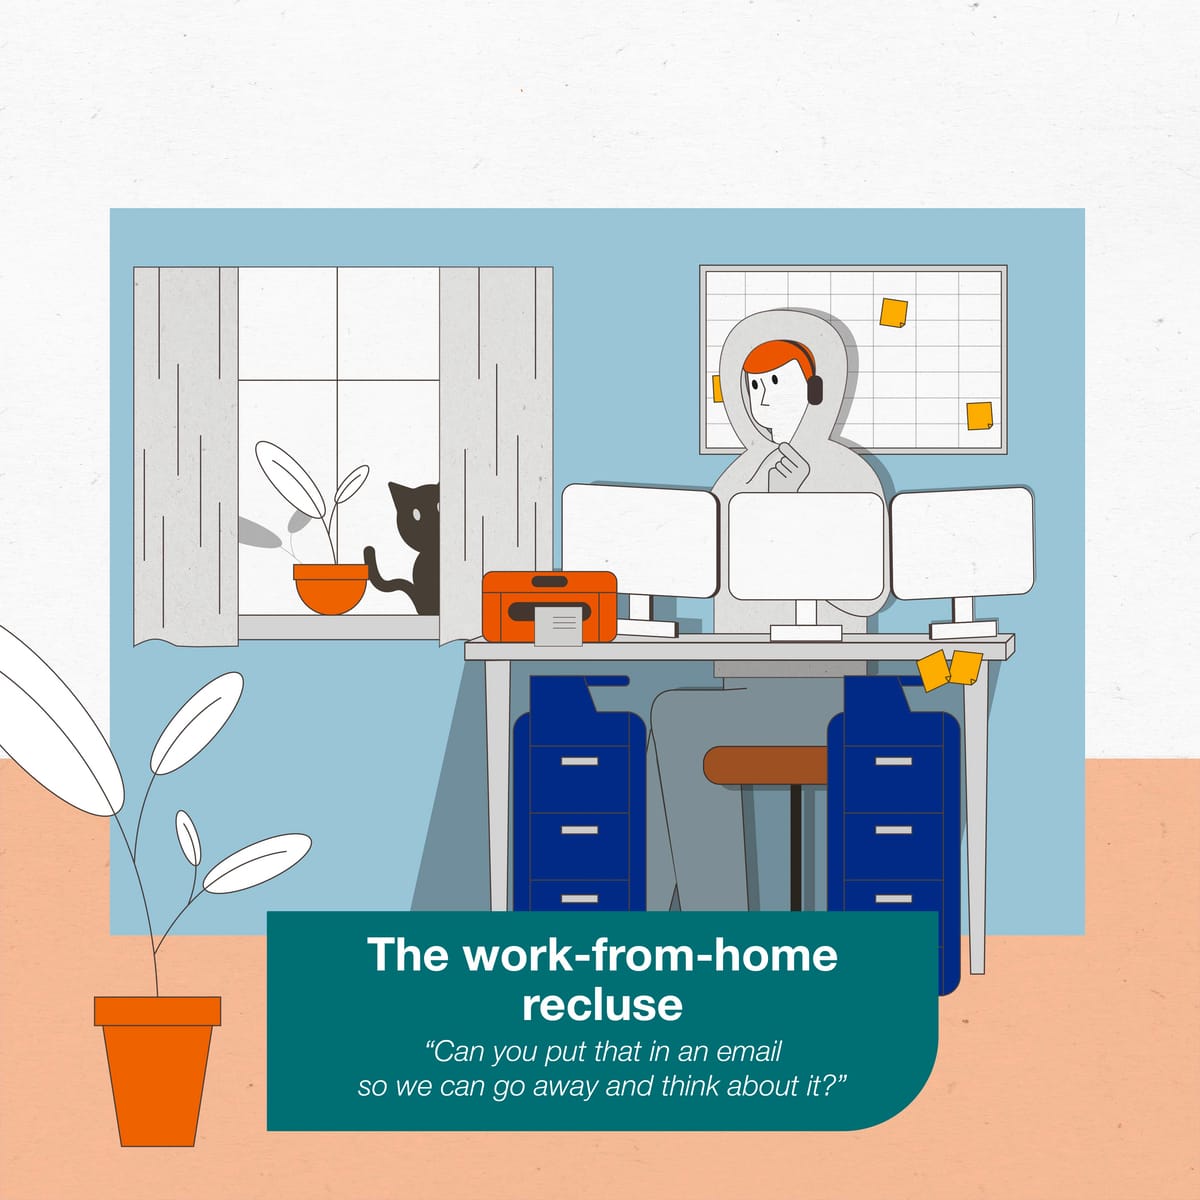 Illustration of a work-from-home recluse surrounded by IT equipment in a home office environment